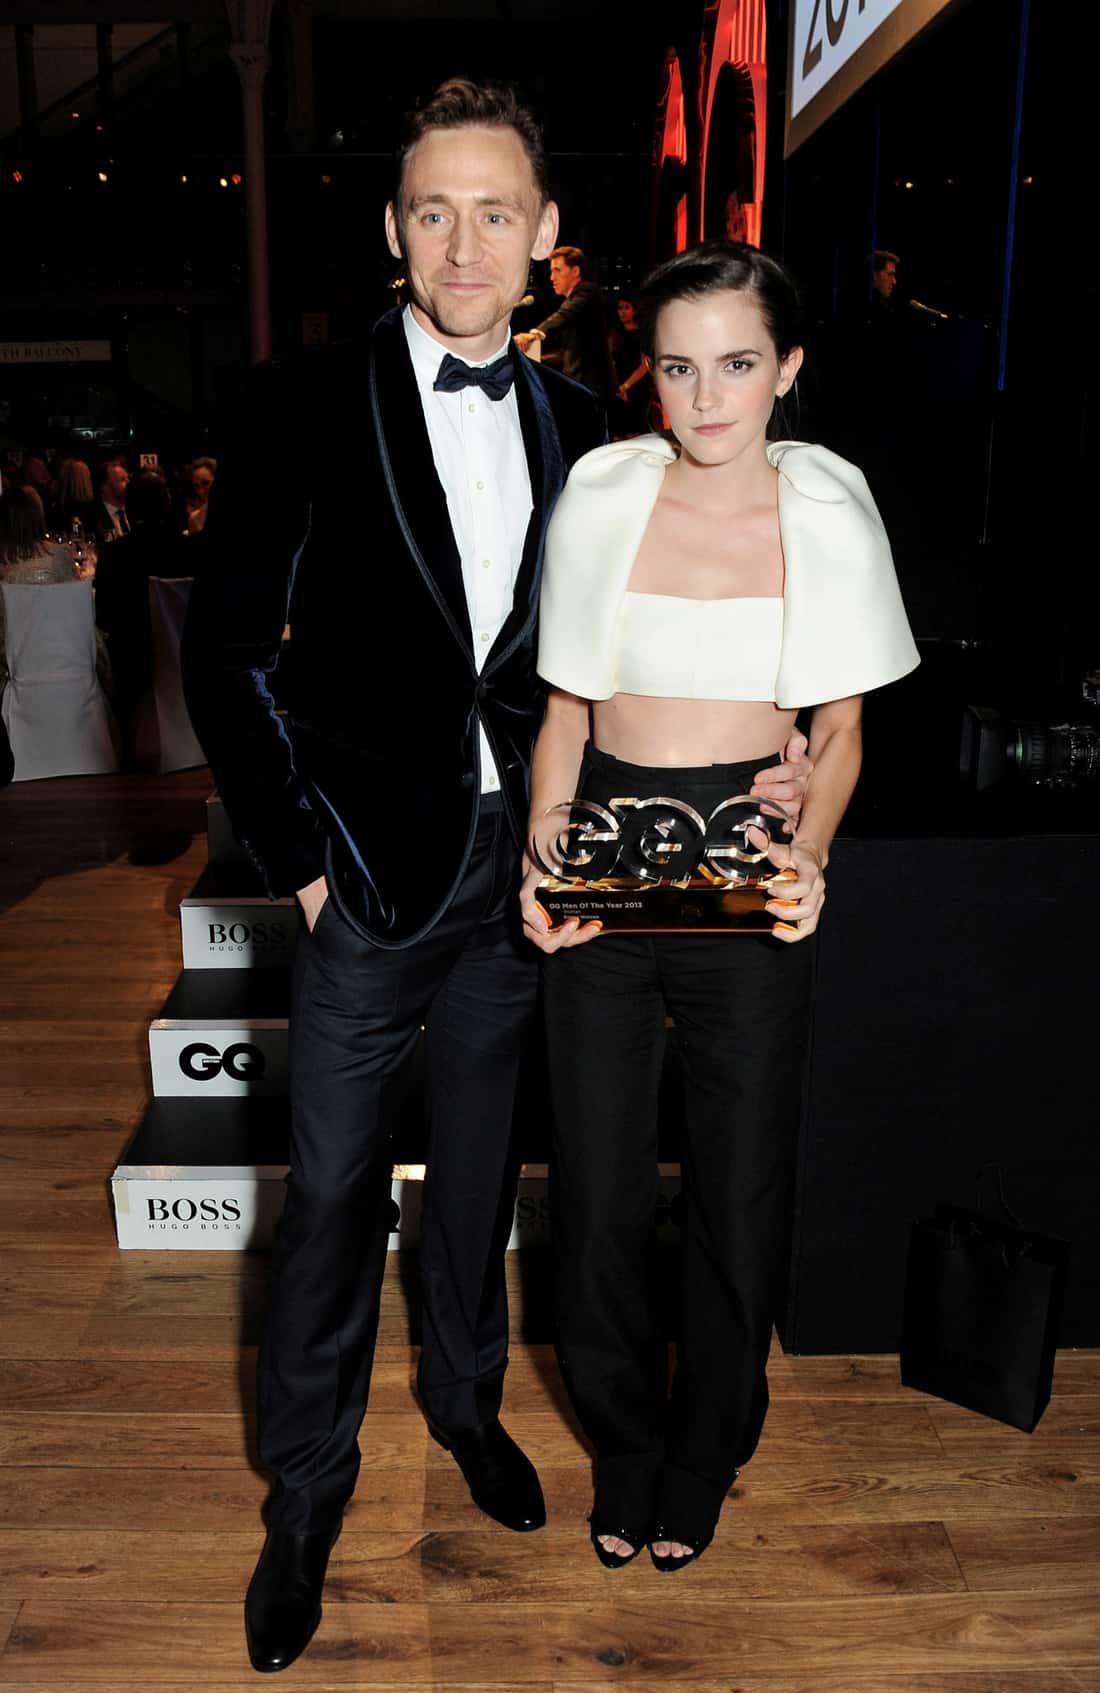 Emma Watson Stuns in White Crop Top at GQ Men of the Year Awards